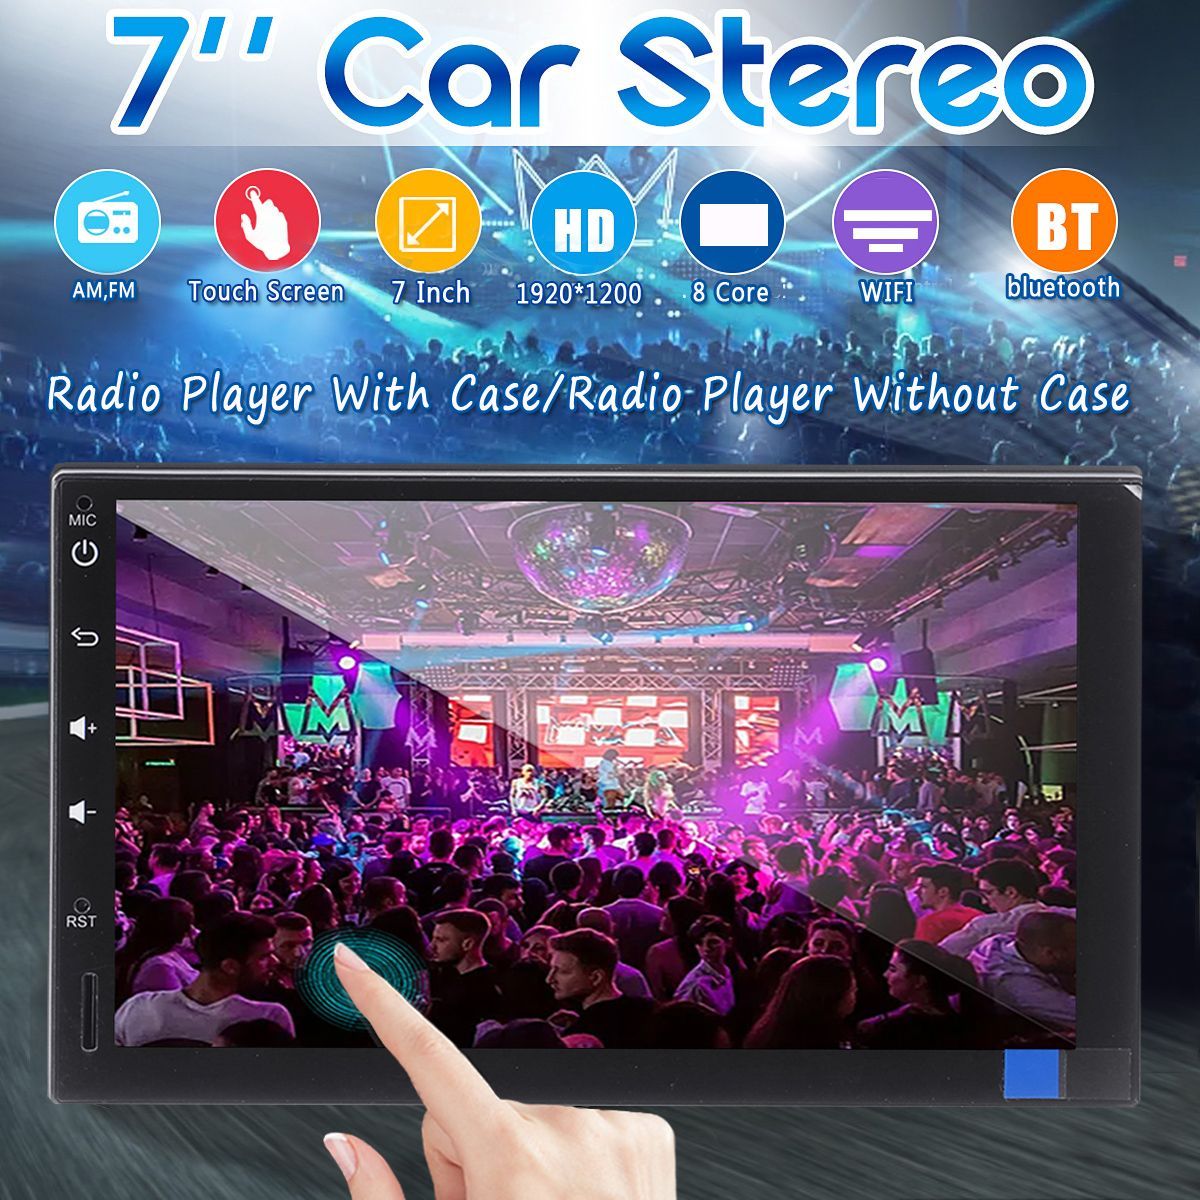 YUEHOO-7-Inch-2-DIN-for-Android-100-Car-Stereo-Radio-8-Core-432G-Touch-Screen-4G-WIFI-bluetooth-FM-A-1549242